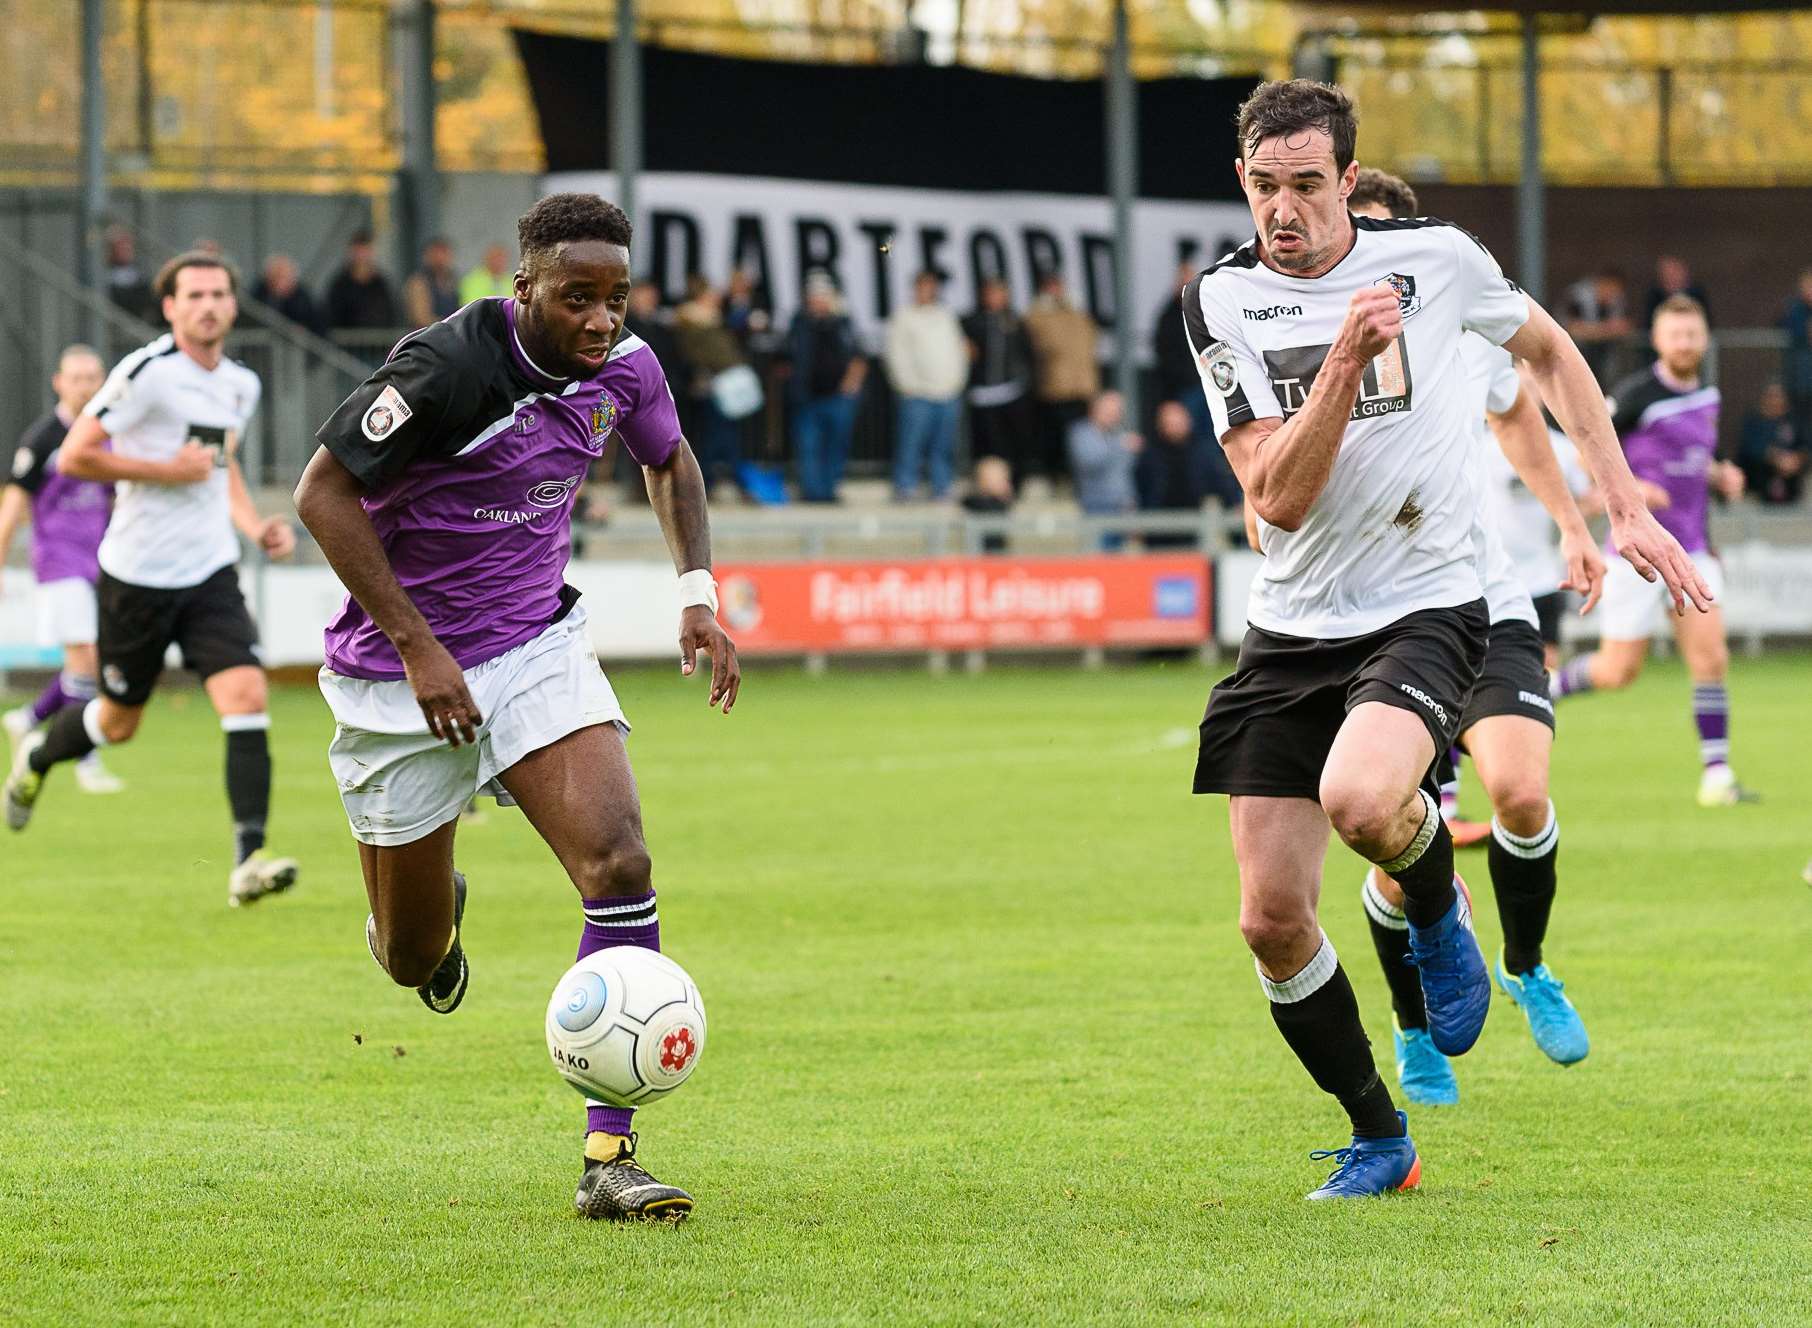 Action from Dartford's 2-1 win over St Albans Picture: Tony Jones